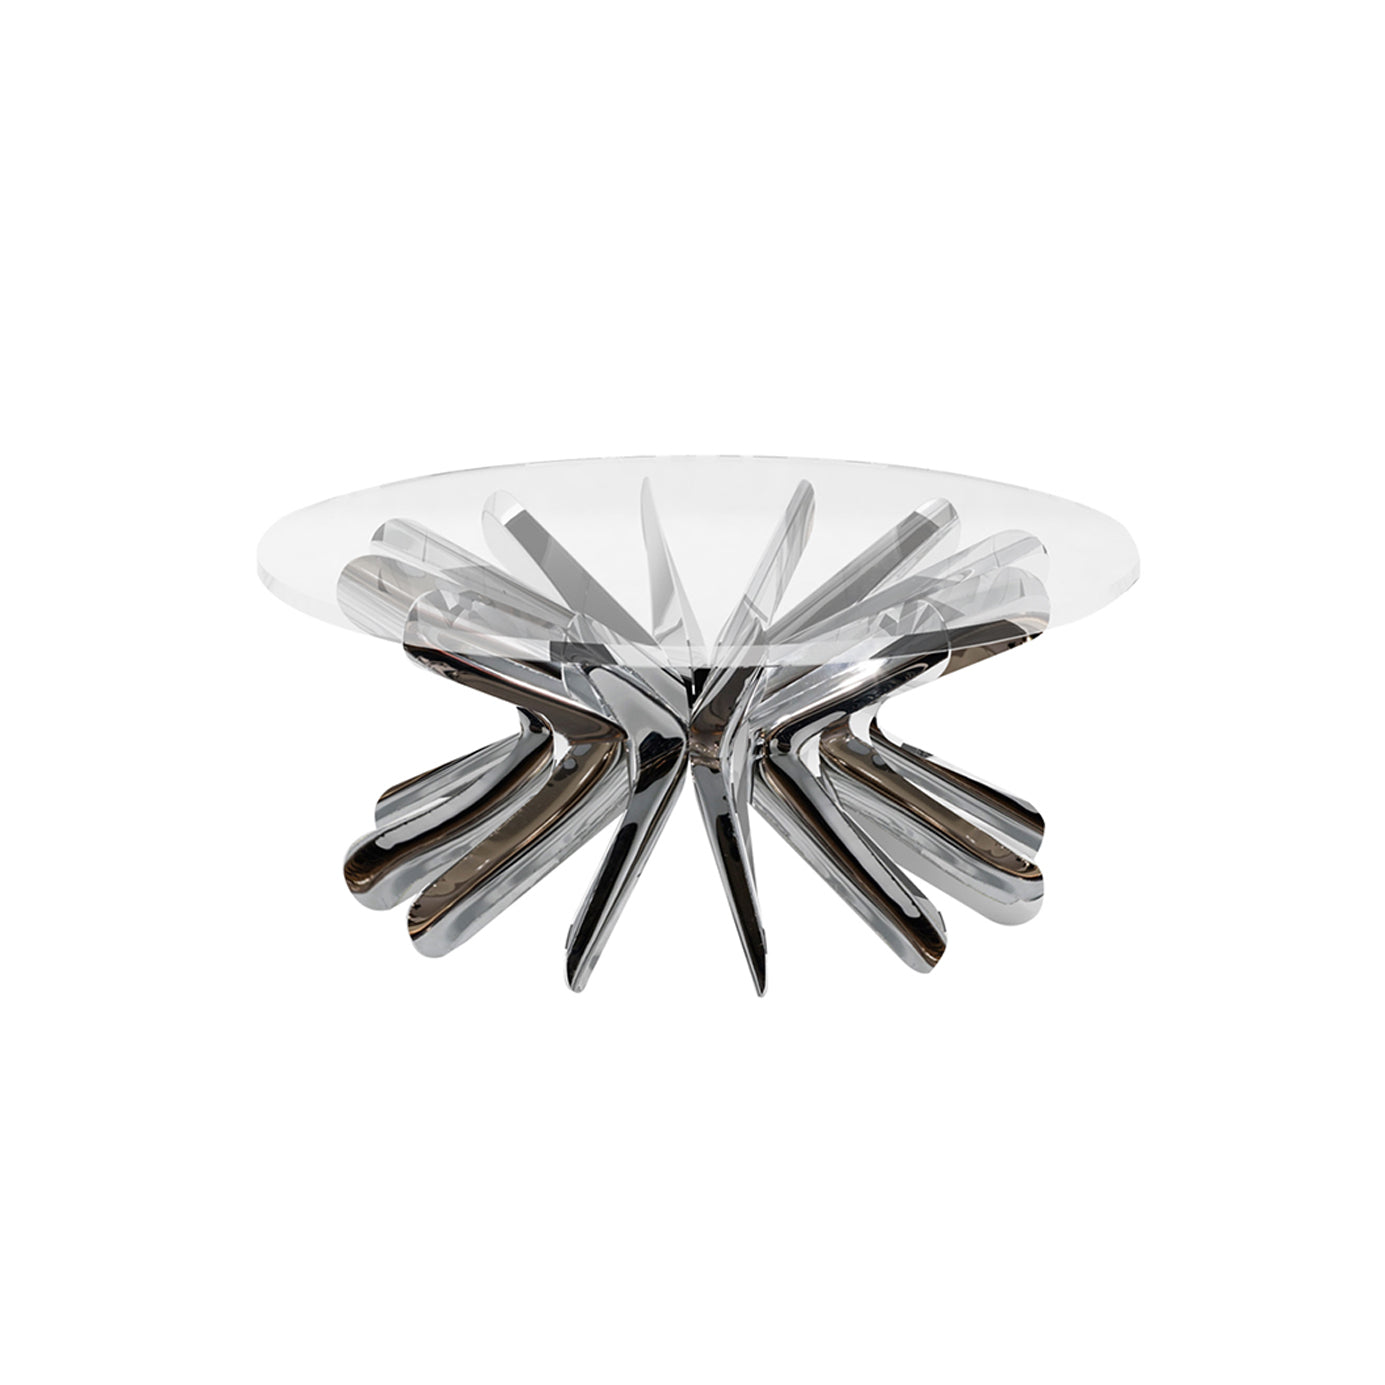 Steel in Rotation Coffee Table: Inox Polished Stainless Steel + Small